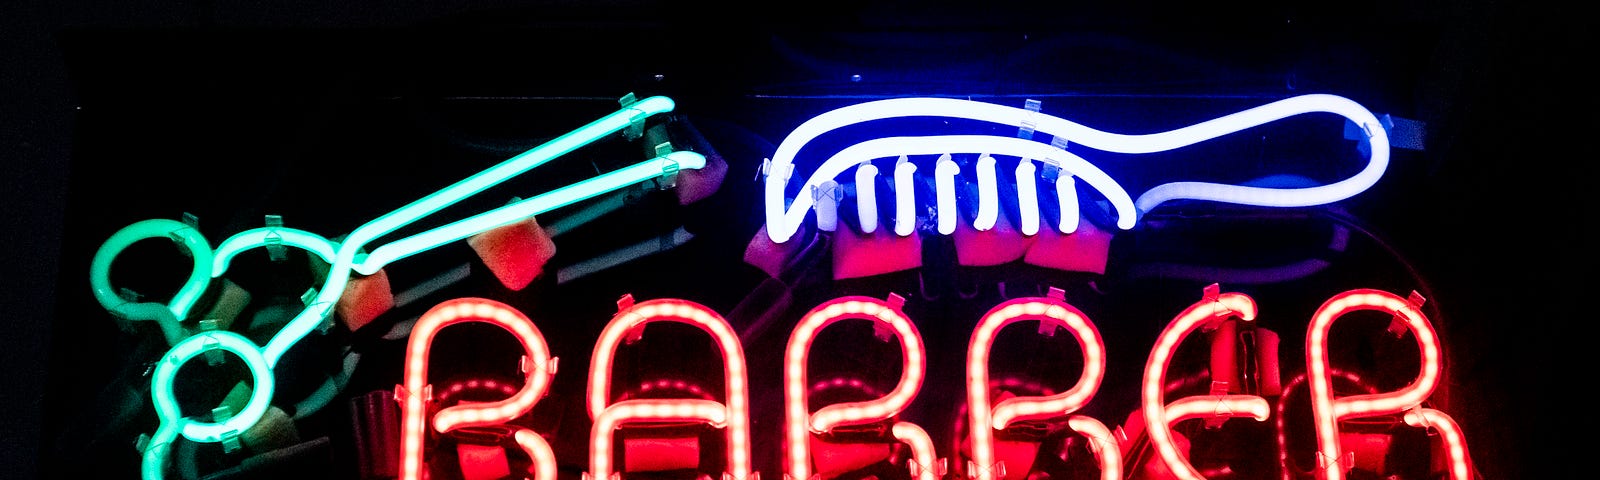 Neon sign with the word ‘barber’ in orange, a pink comb and green scissors.